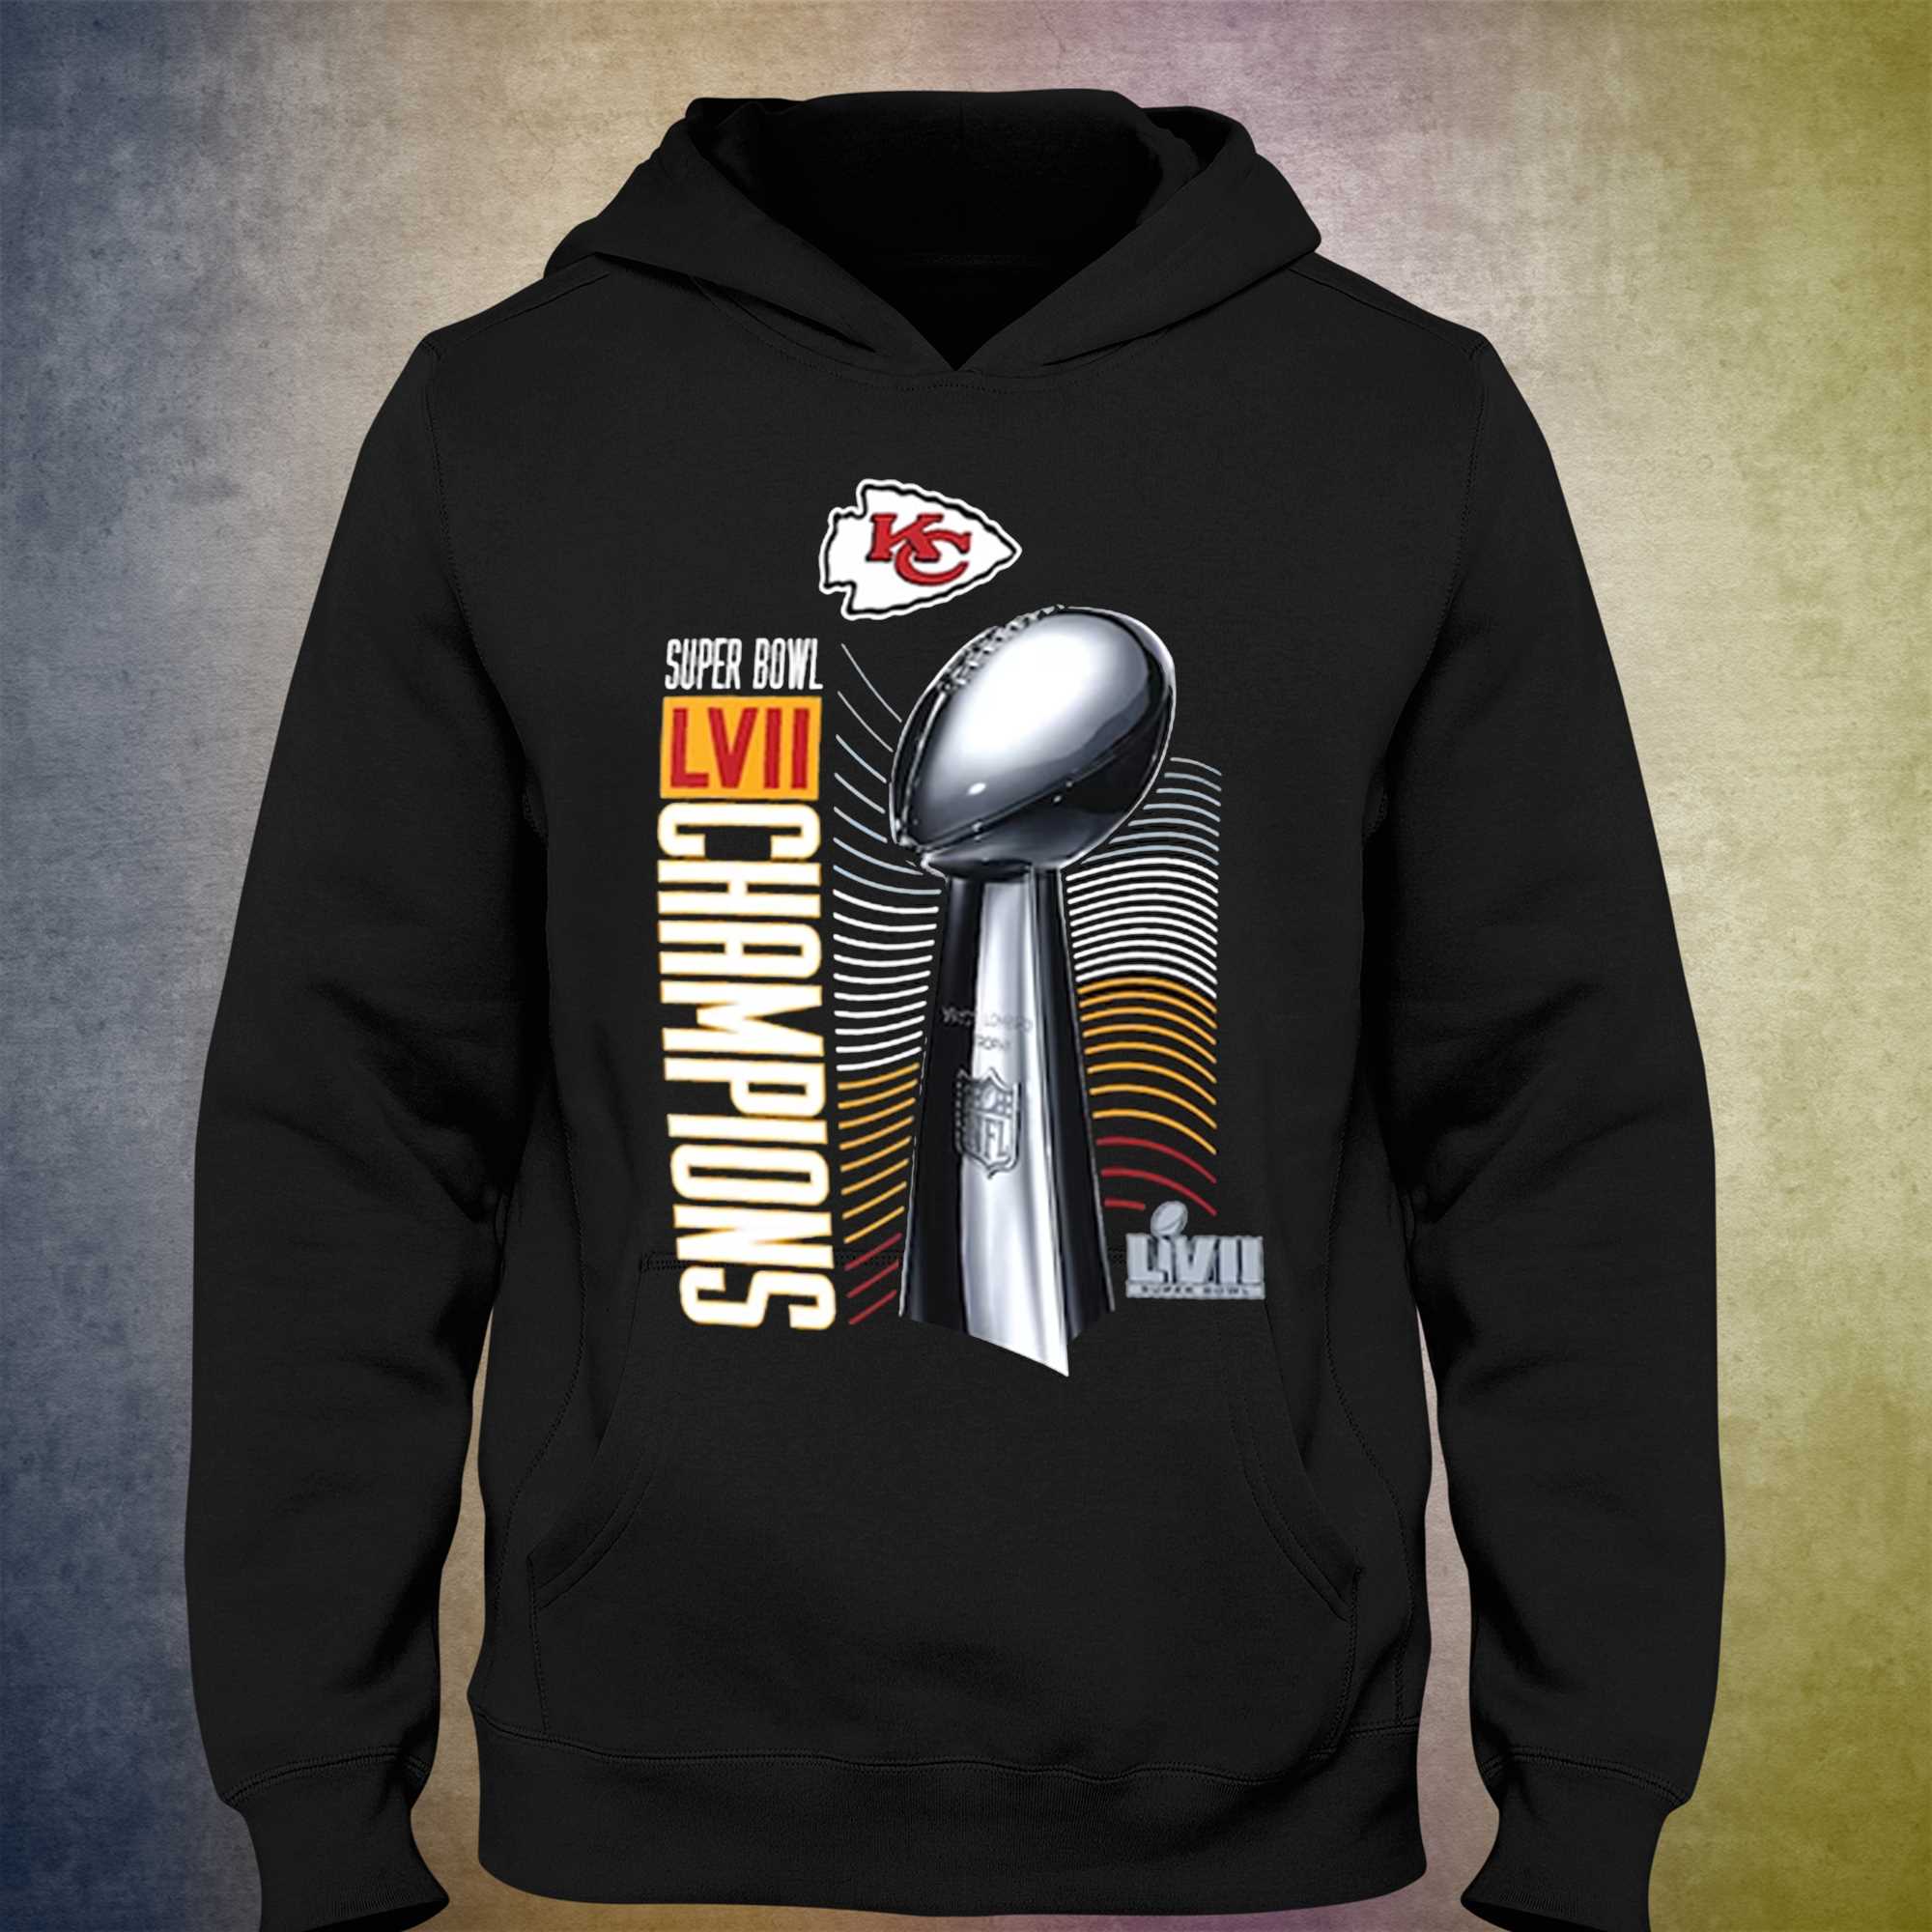 Youth Nike Heather Gray Kansas City Chiefs Super Bowl LVII Champions Parade Pullover Hoodie Size: Large